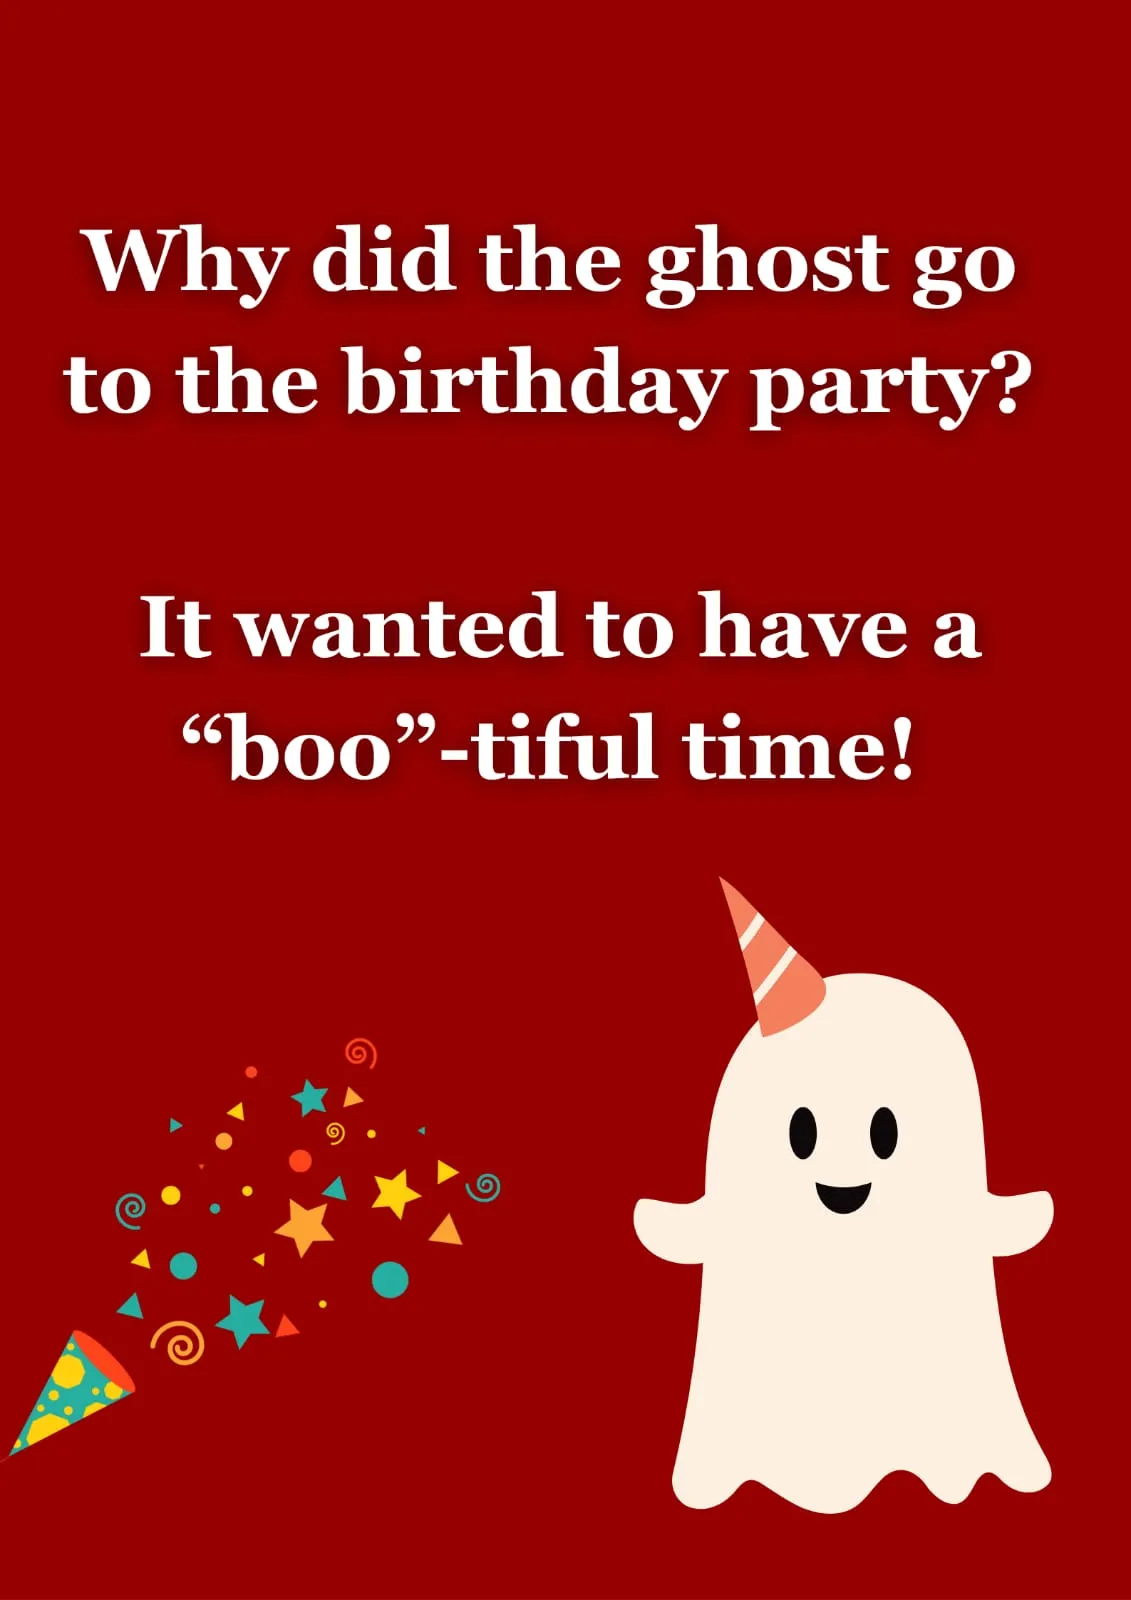 Why did the ghost go to the birthday party?